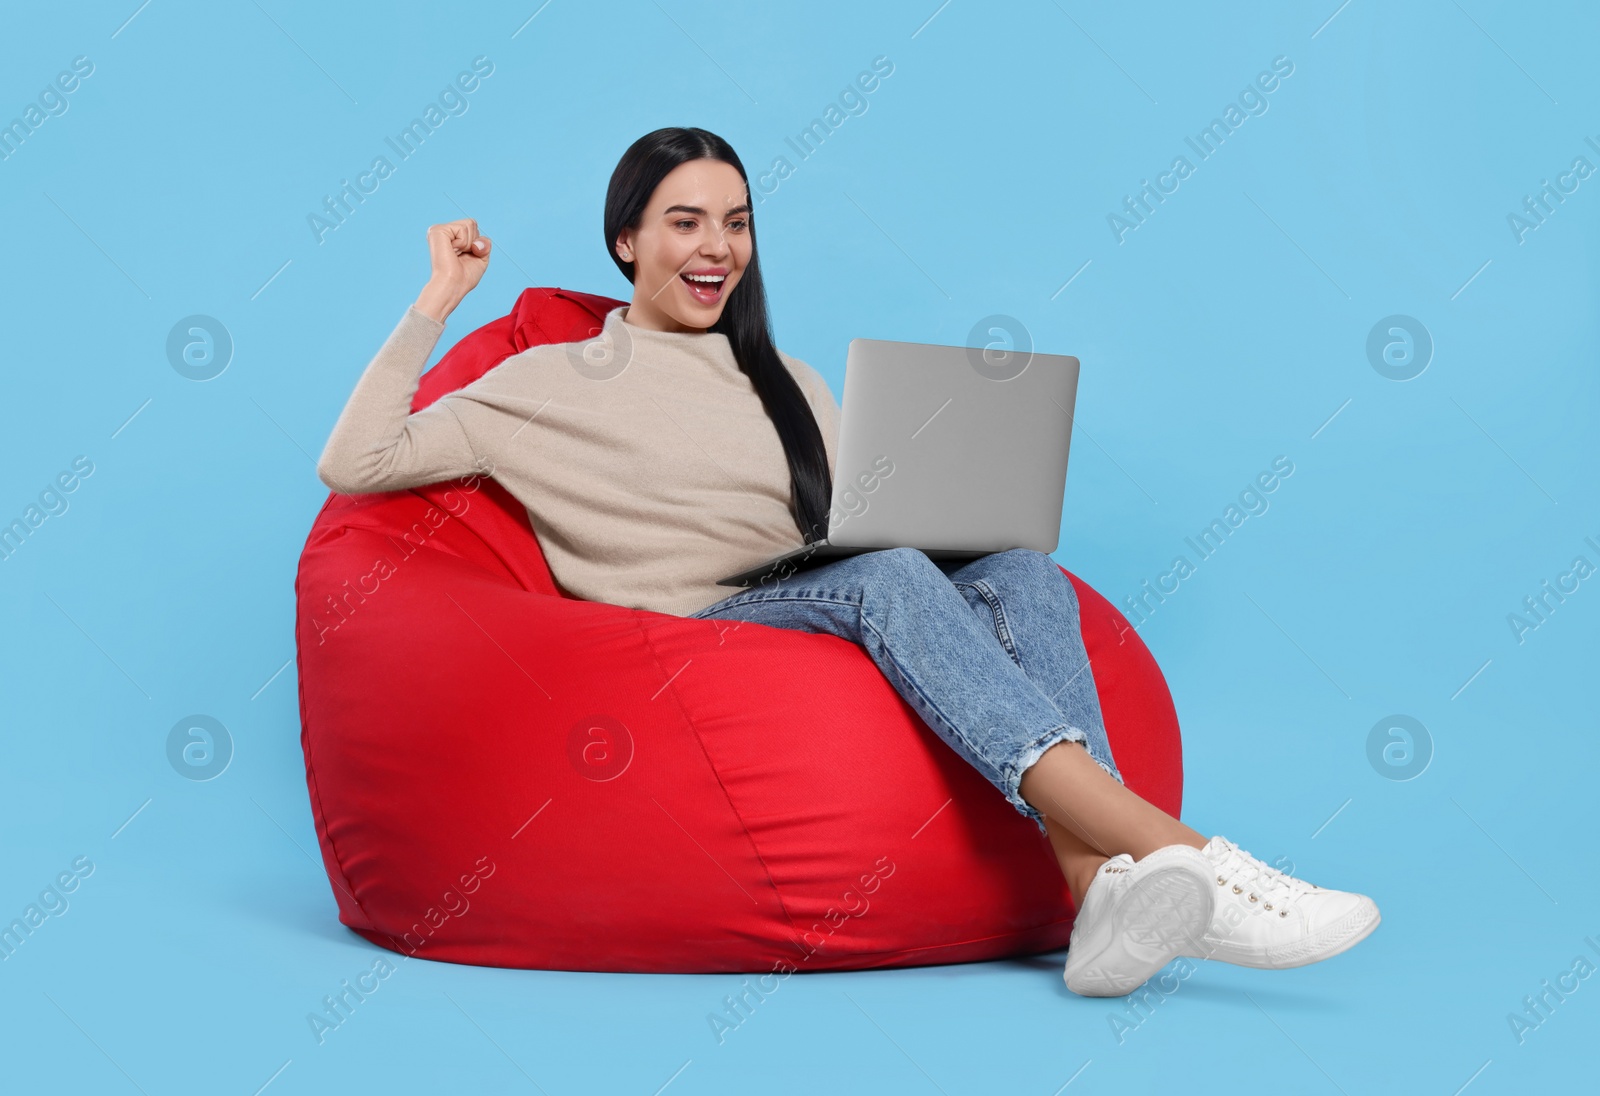 Photo of Cheerful woman with laptop sitting on beanbag chair against light blue background